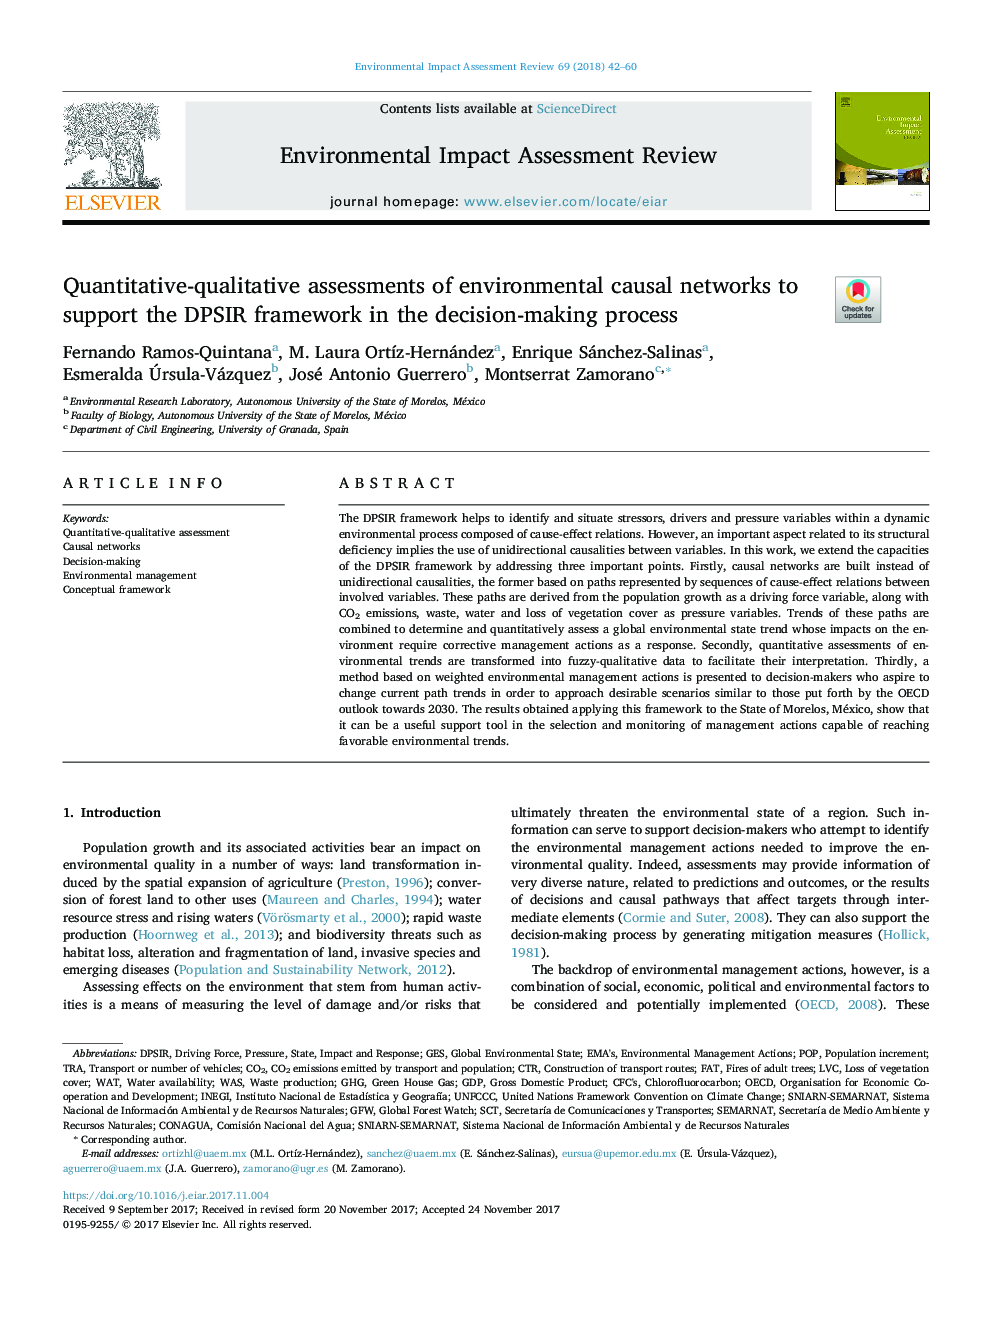 Quantitative-qualitative assessments of environmental causal networks to support the DPSIR framework in the decision-making process